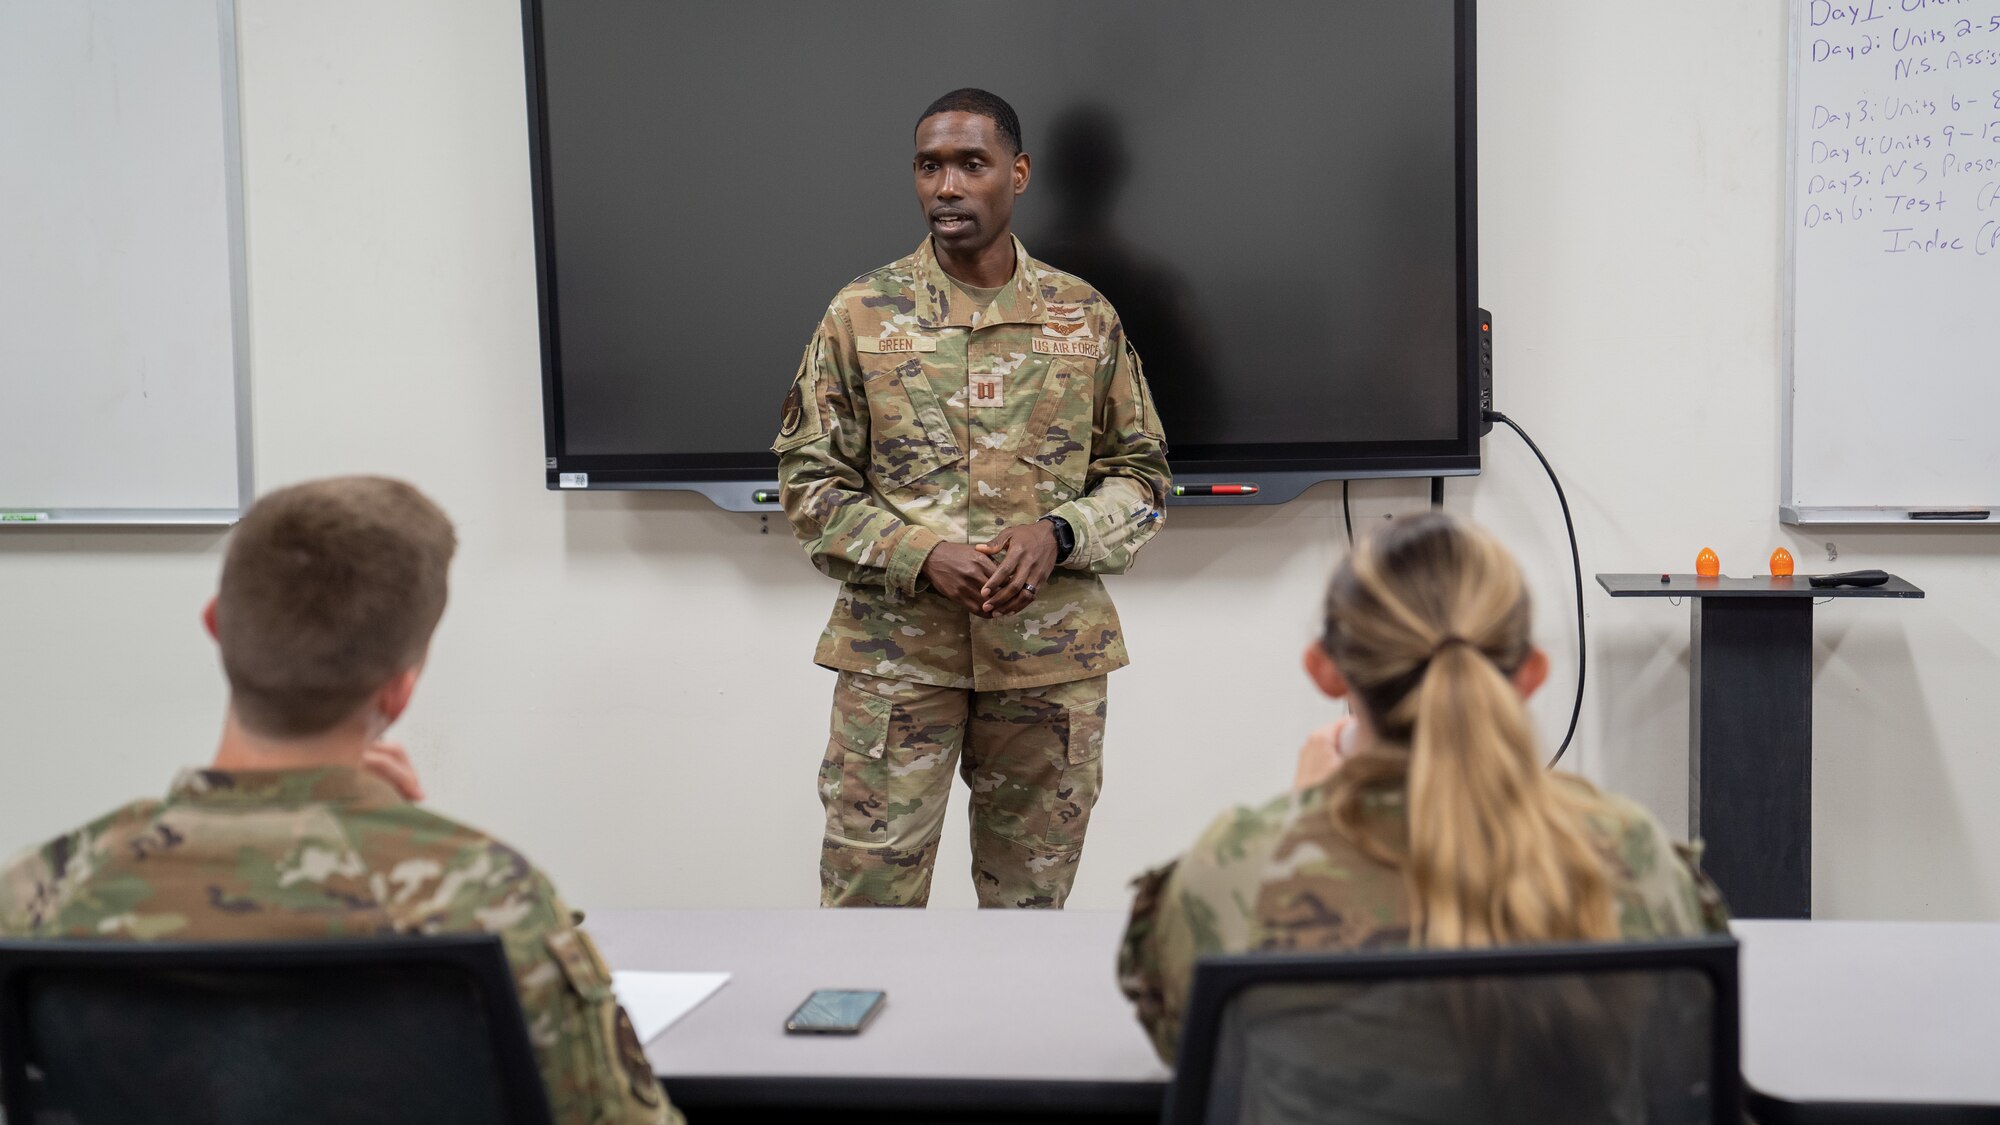 U.S. Air Force Capt. Armand Green, 333rd Training Squadron instructor supervisor, begins classroom introductions at Stennis Hall on Keesler Air Force Base, Mississippi, July 13, 2023. The 333rd TRS teaches Undergraduate Cyber Training, Cyber Warfare Operations, IT Fundamentals and Spectrum Operations. (U.S. Air Force photo by Senior Airman Kimberly L. Touchet)